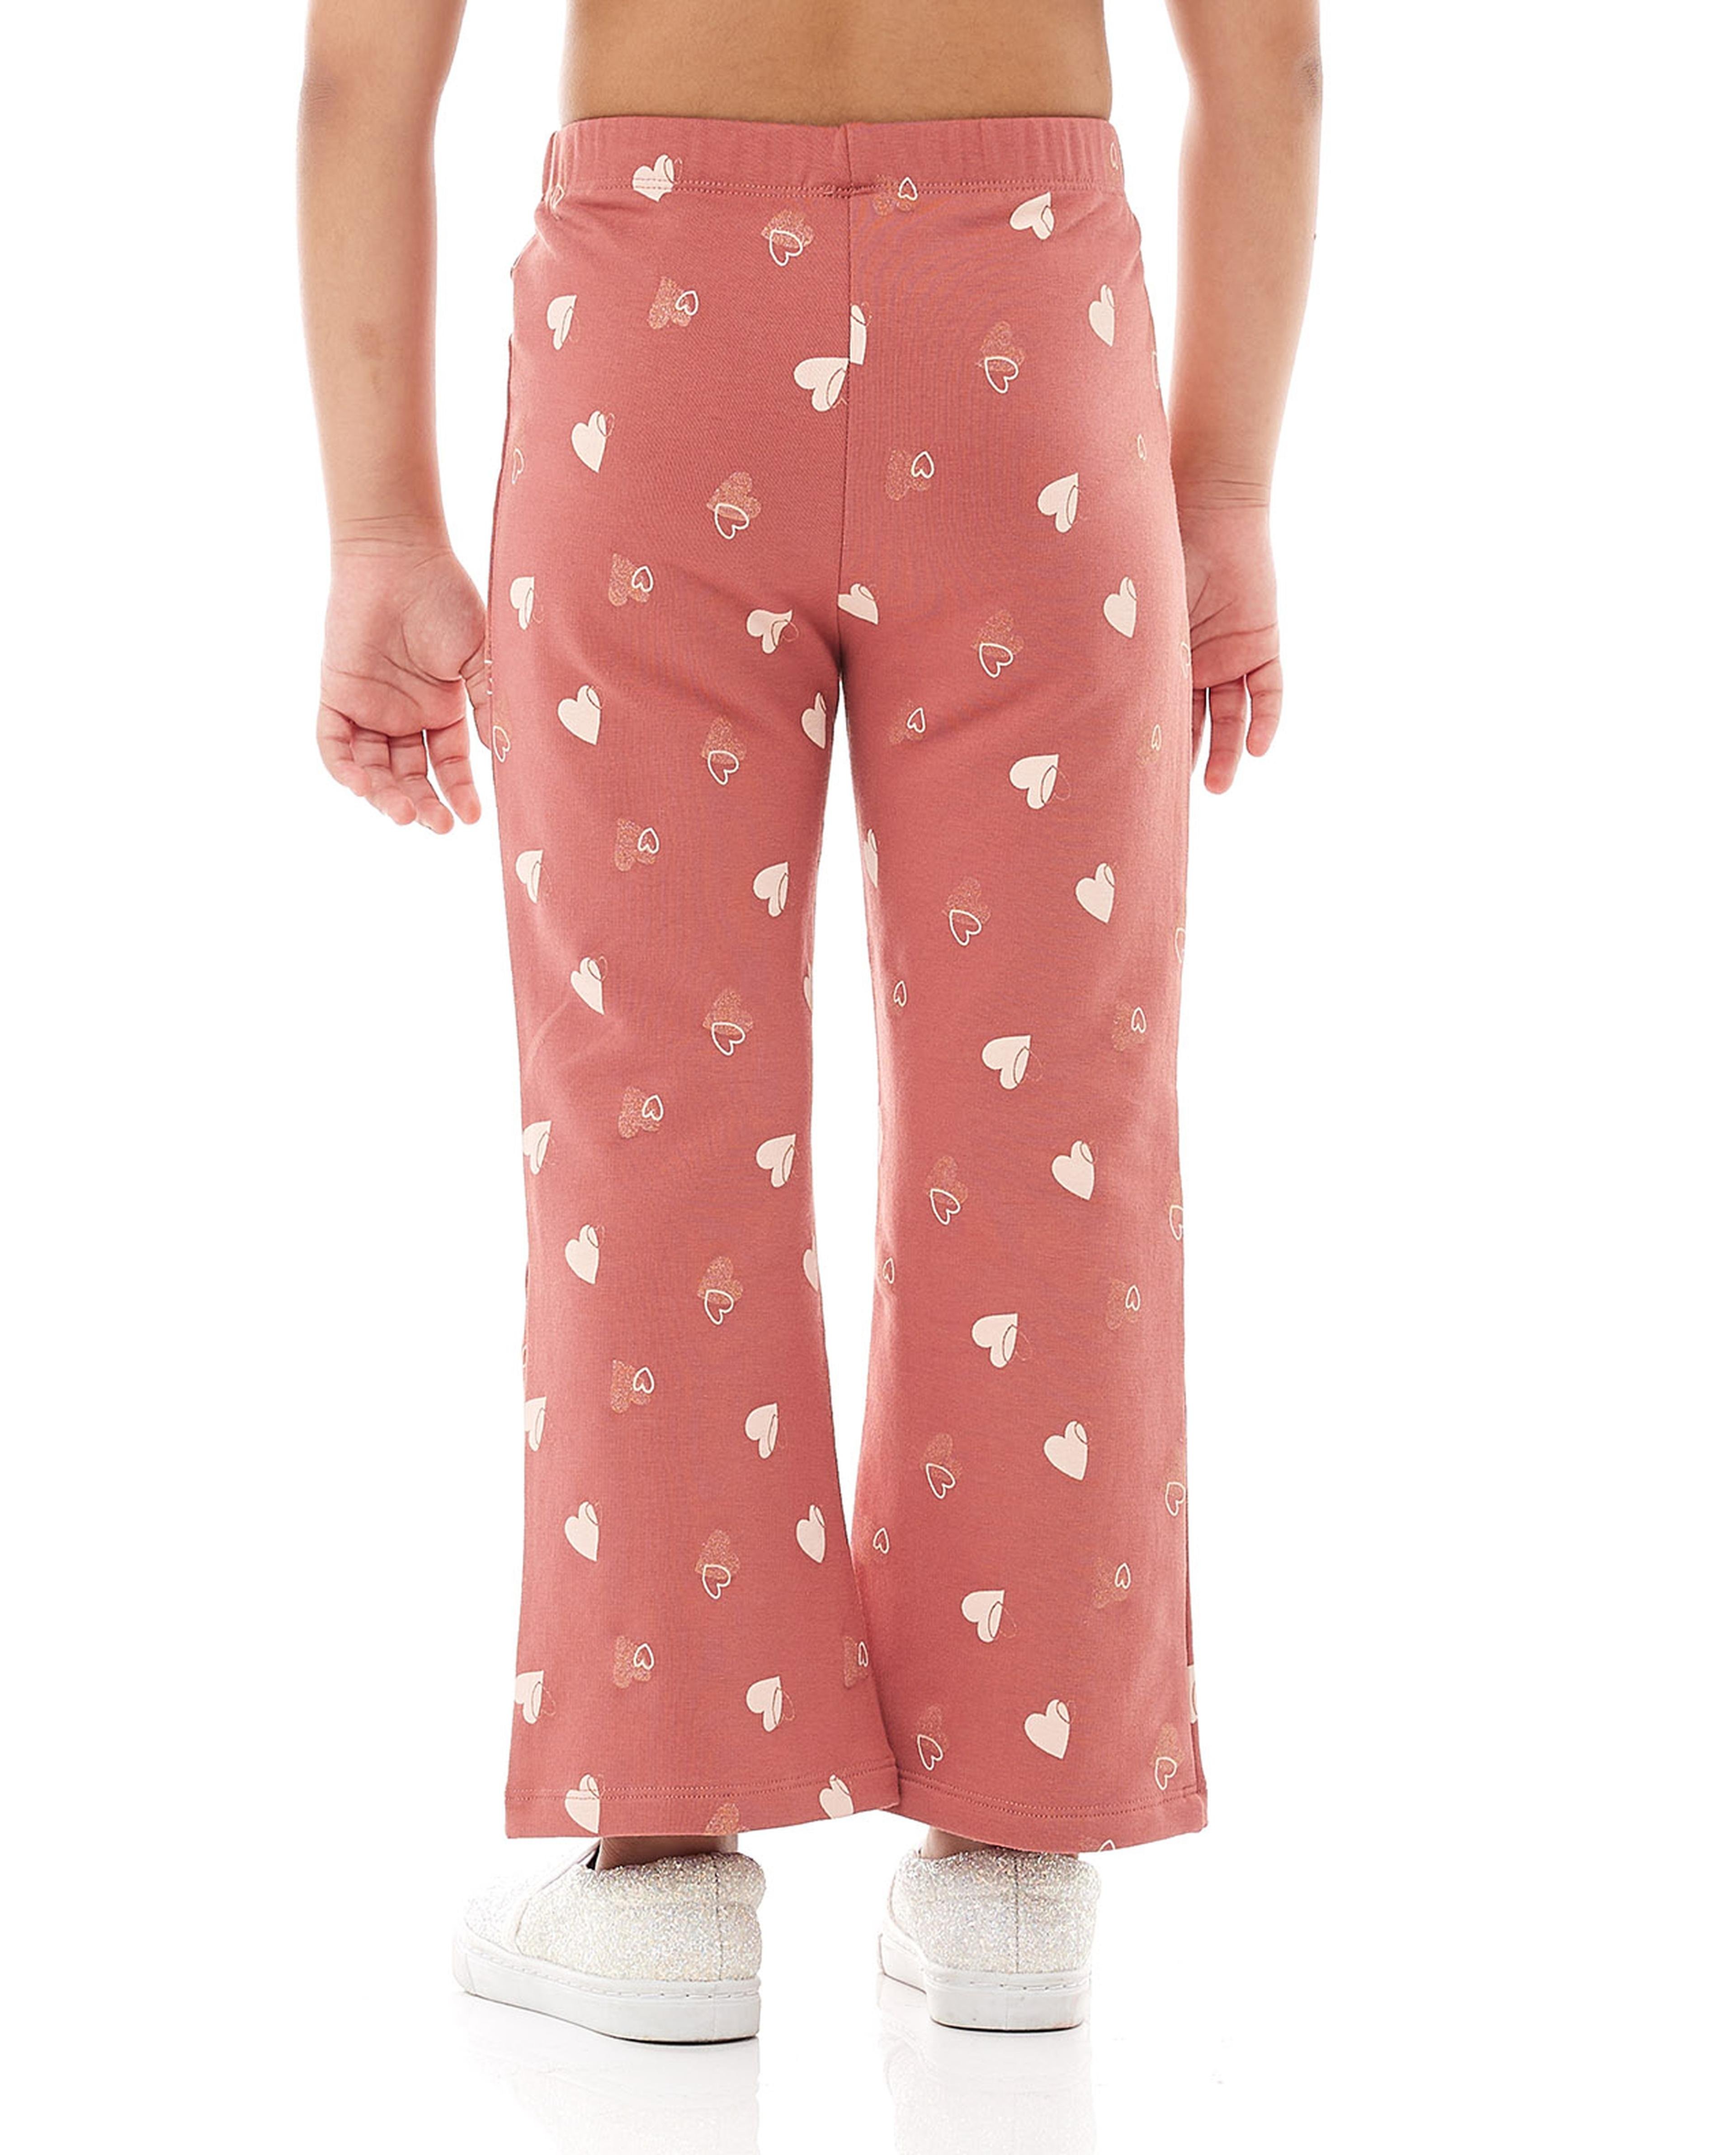 Heart Patterned Flared Knit Pants with Elastic Waist